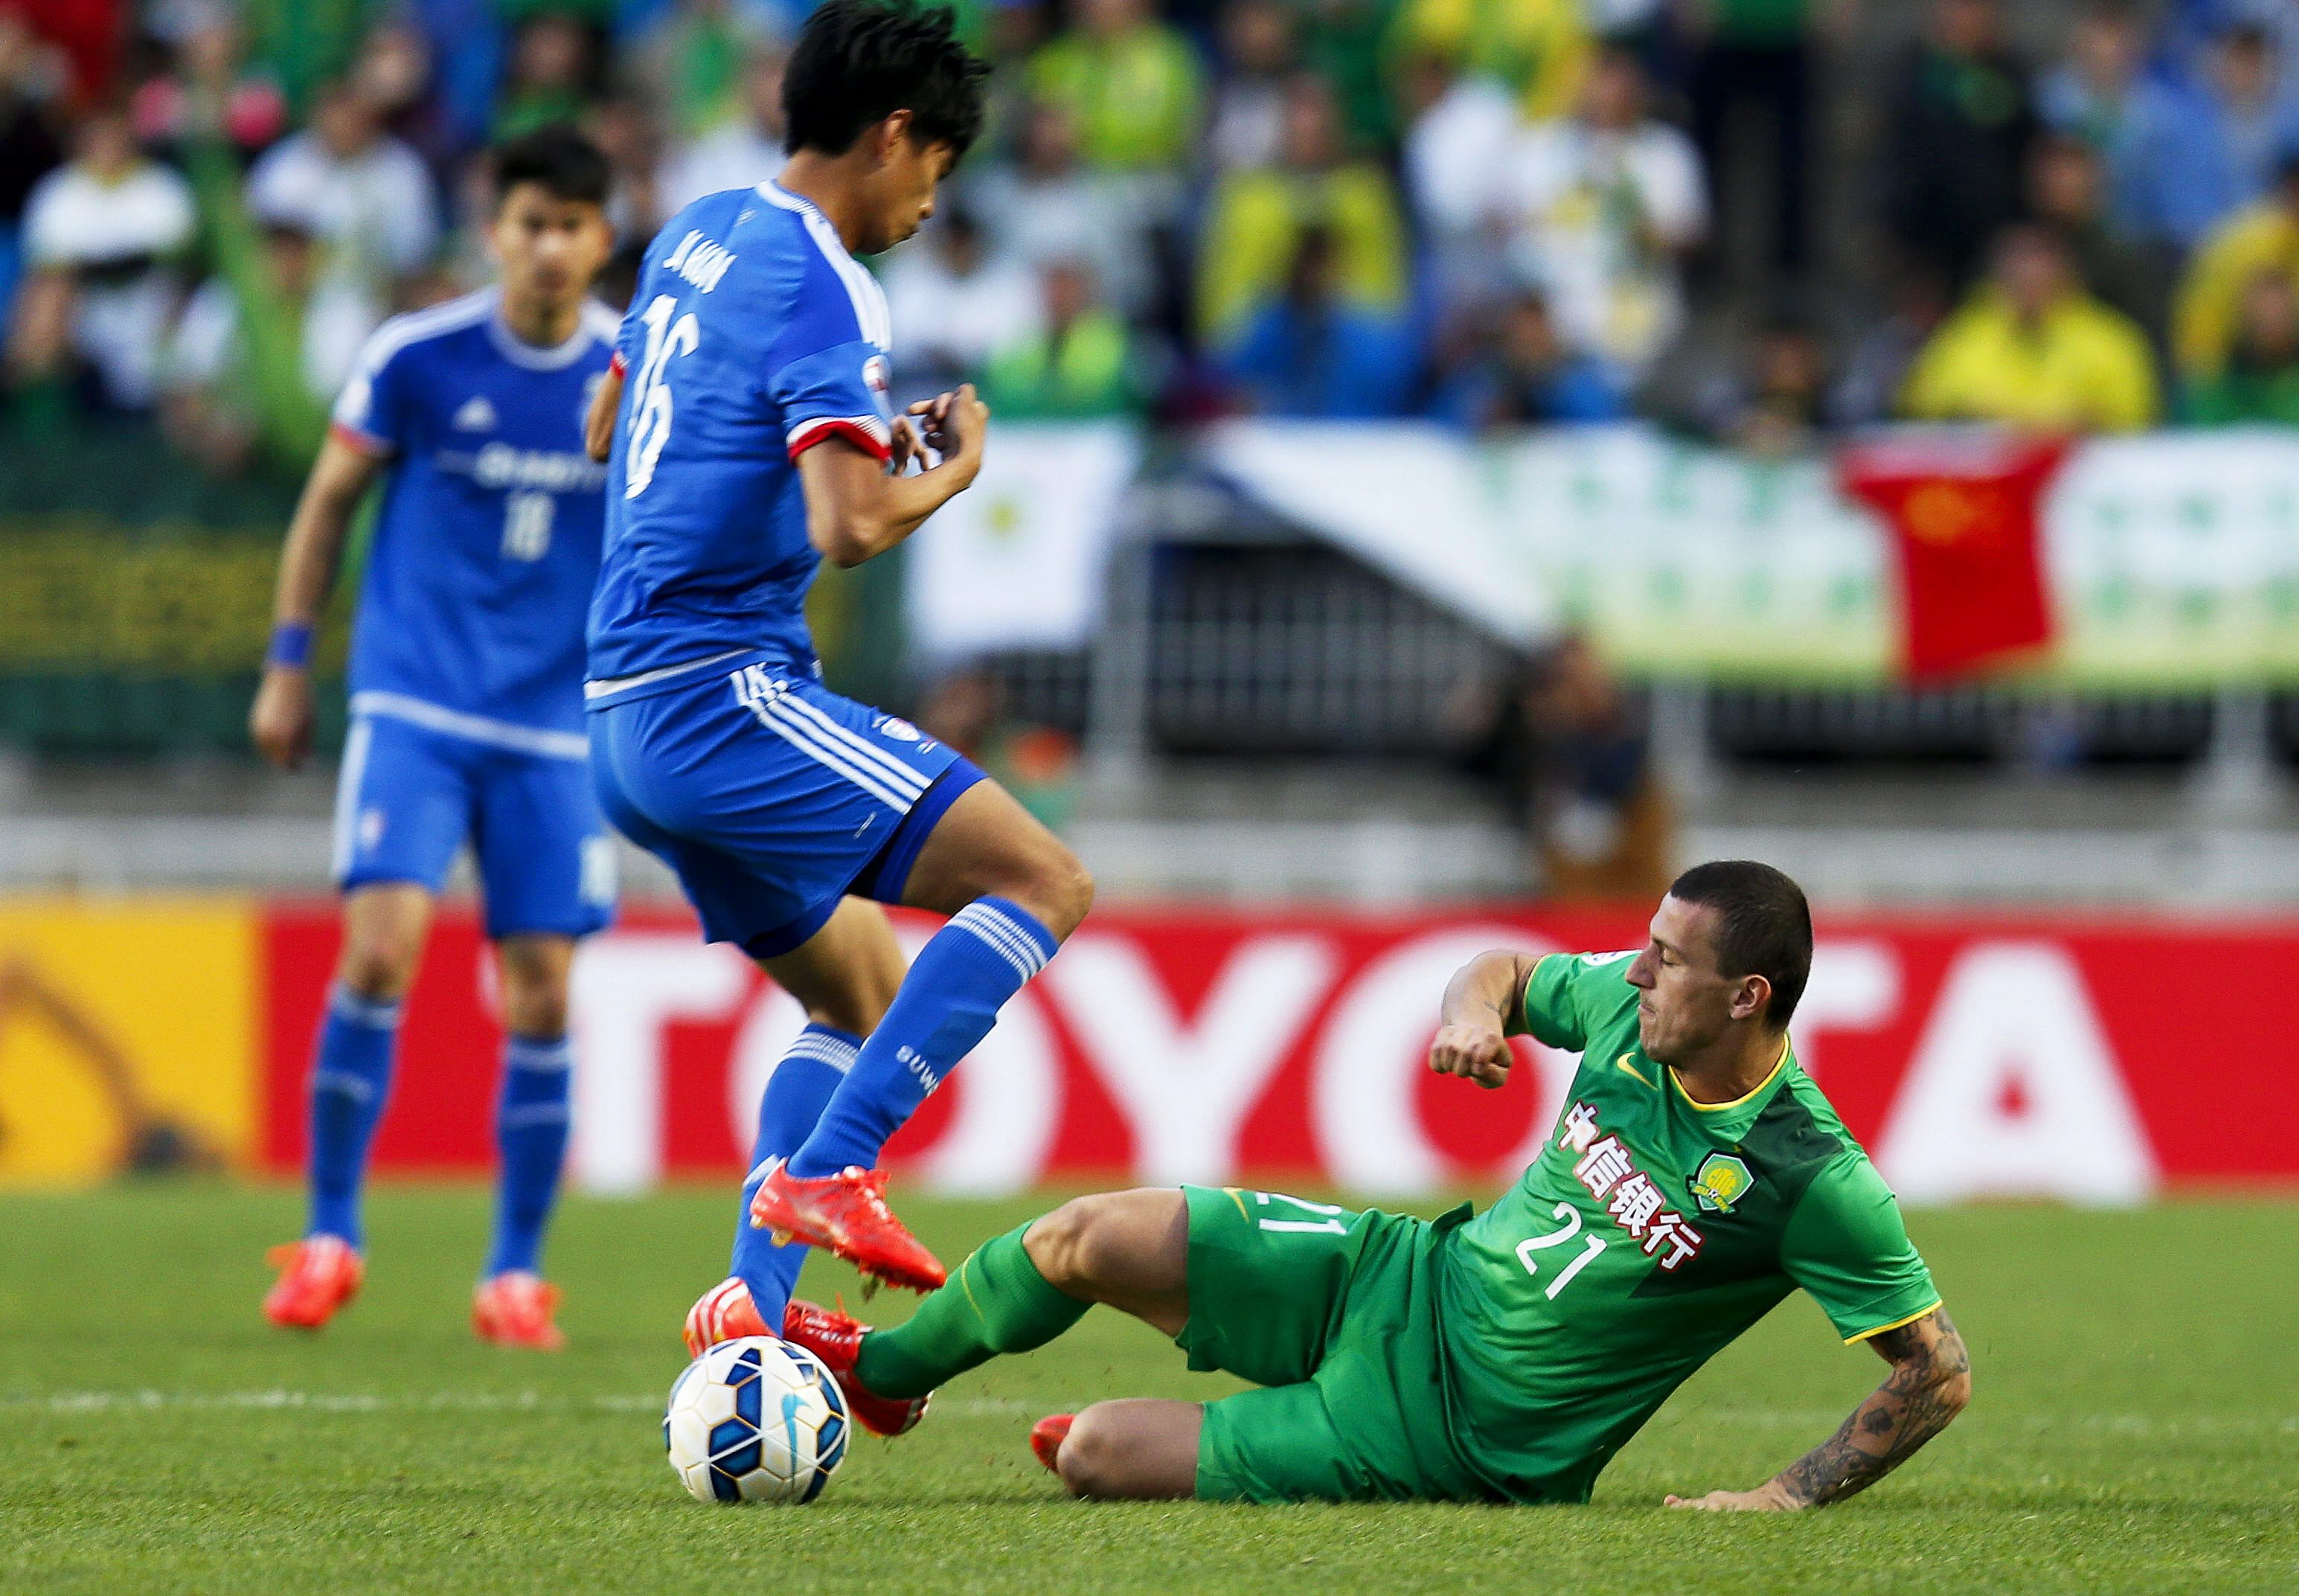 Beijing Guoan have faced some tough games on route to the last 16 of this year's AFC Champions League. Photo: EPA